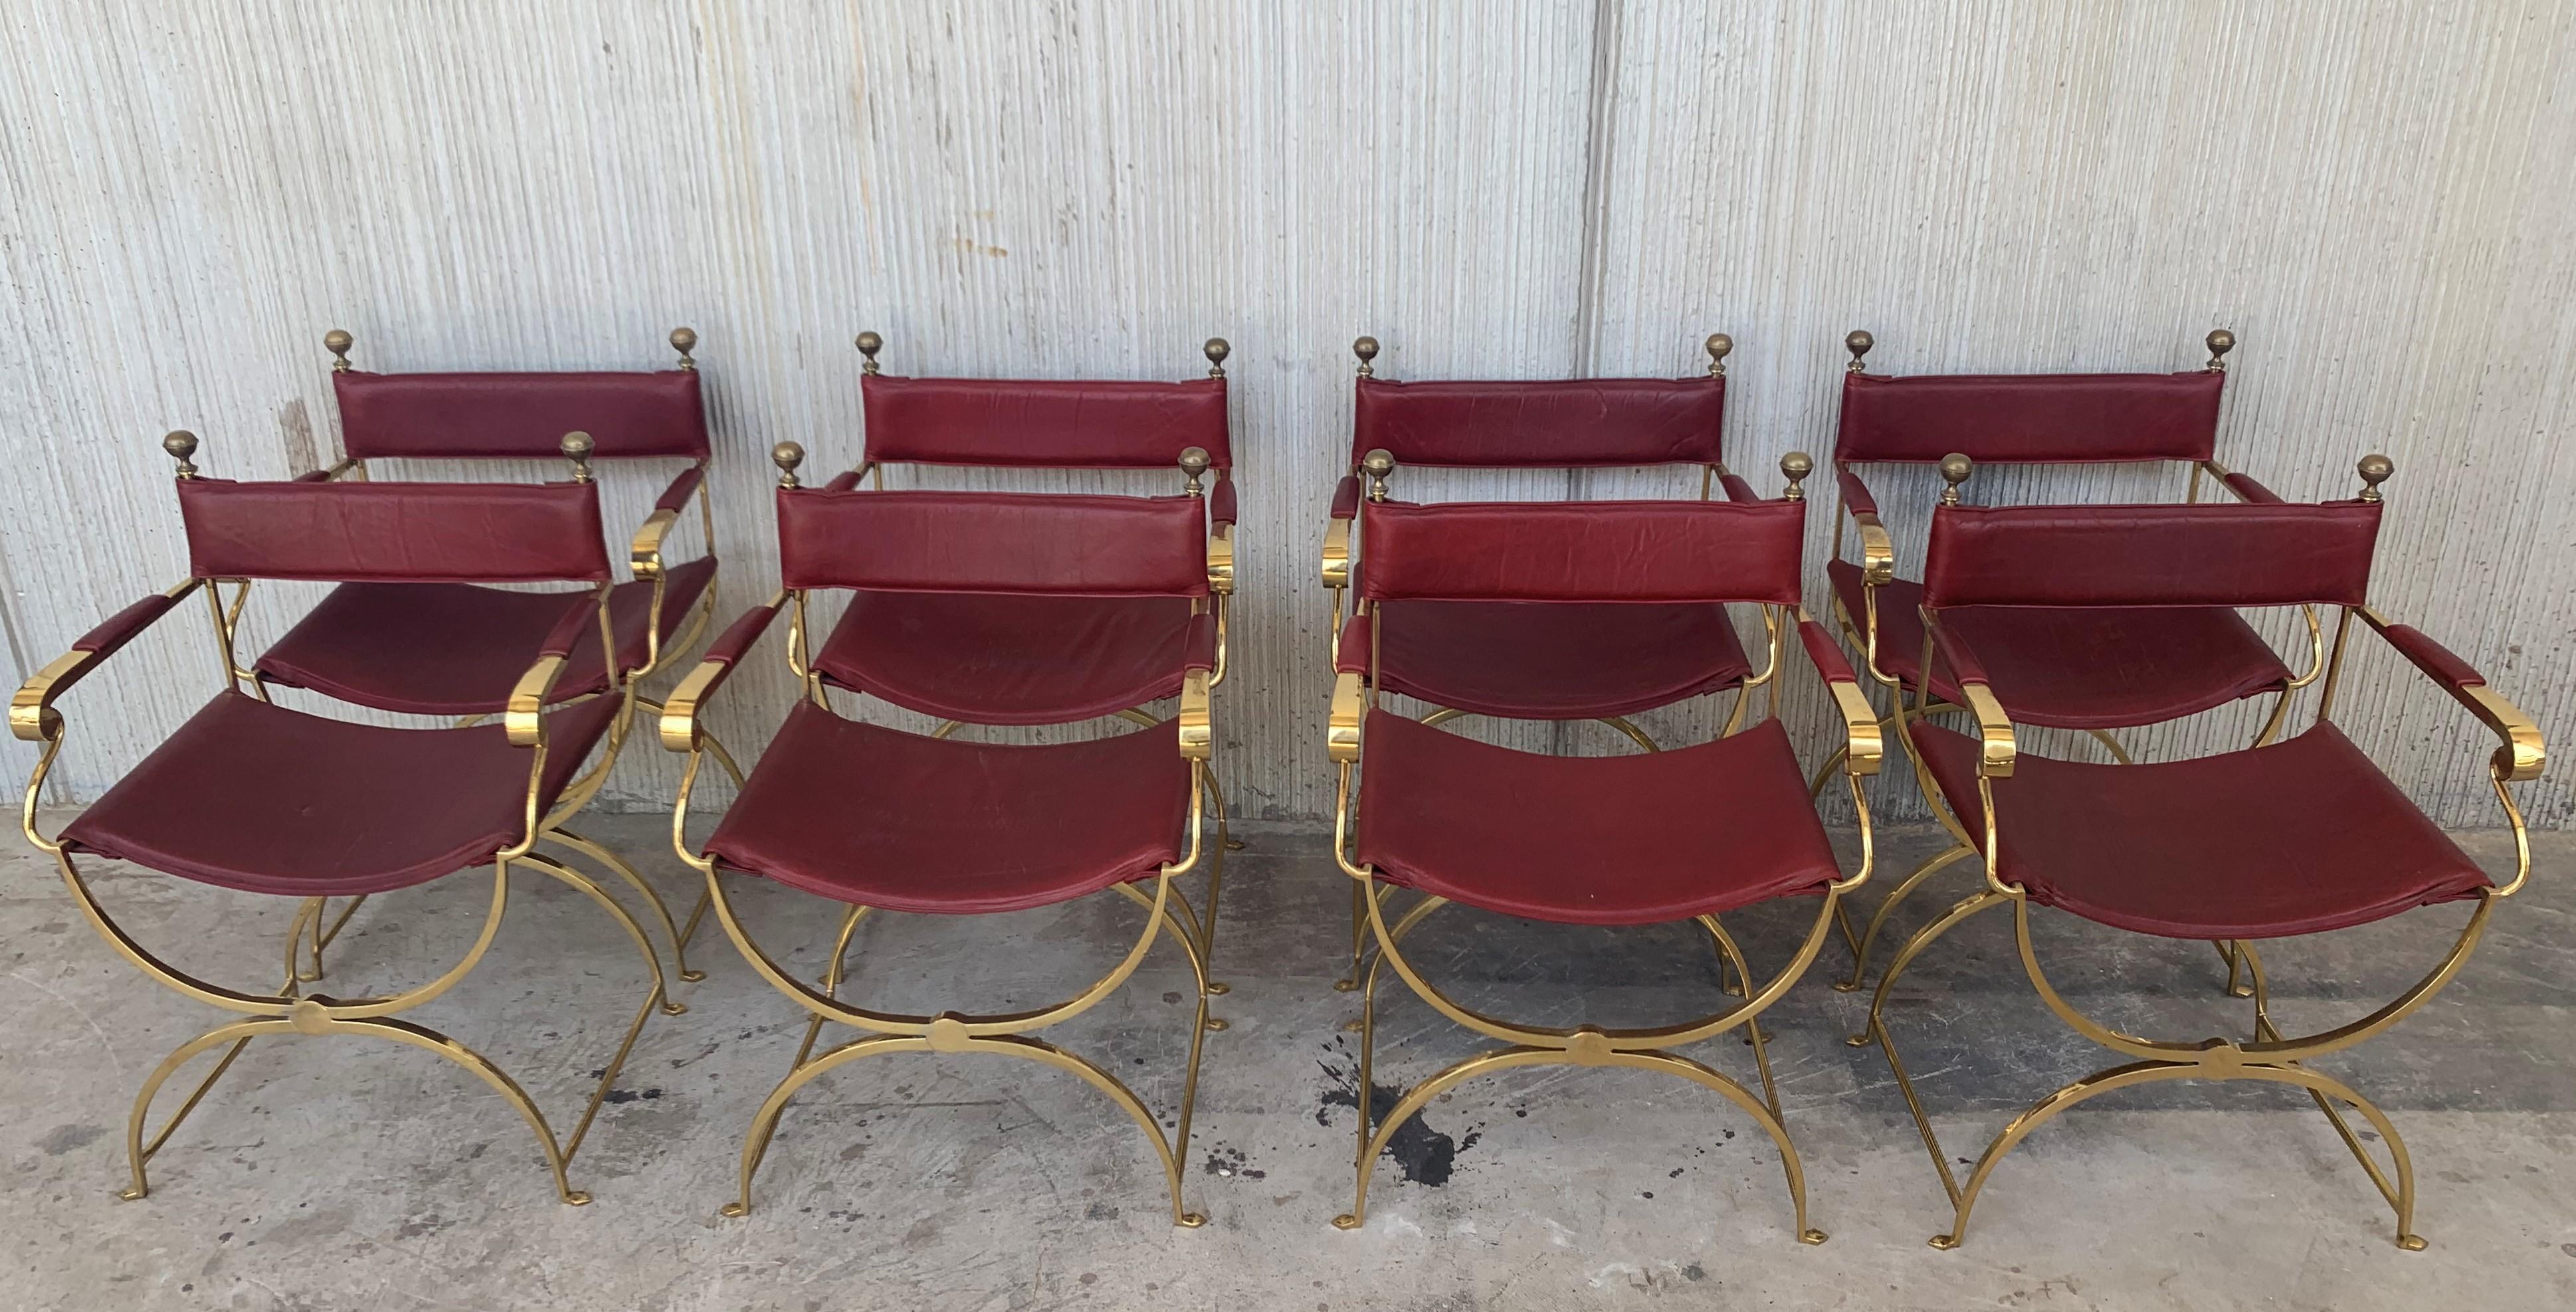 1960s Italian Hollywood Regency Chrome and Leather Savonarola Director's Chairs For Sale 6